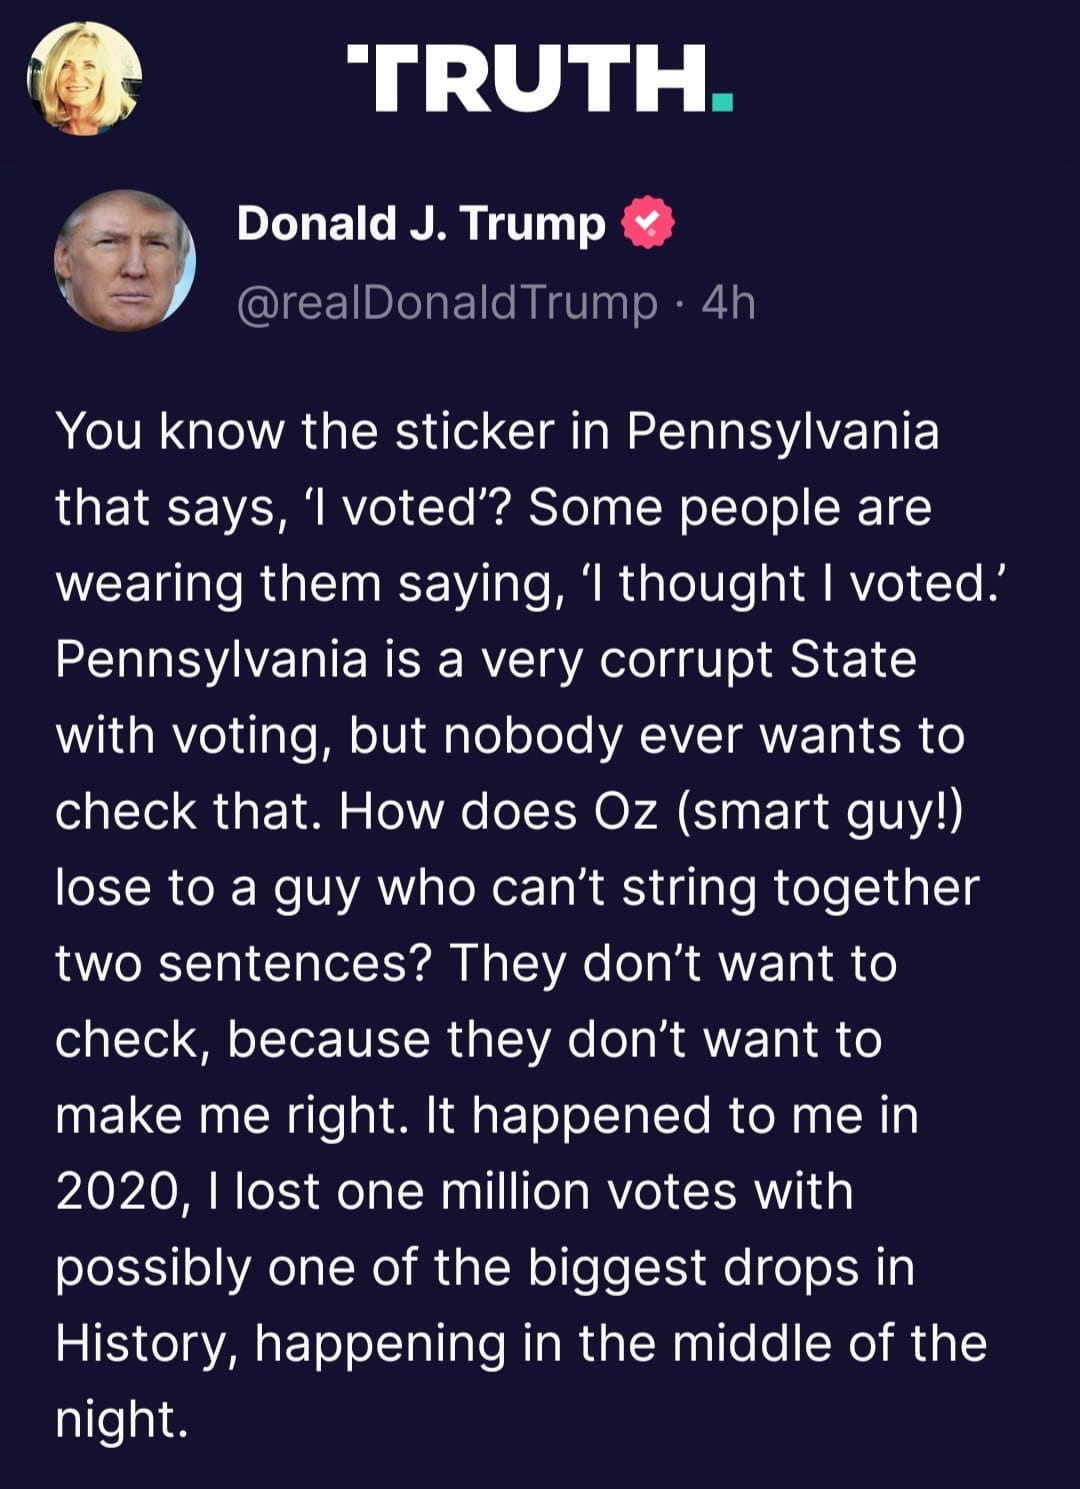 May be a Twitter screenshot of 2 people and text that says 'TRUTH. Donald J. Trump @realDonaldTrump 4h voted.' You know the sticker in Pennsylvania that says, ×I voted'? Some people are wearing them saying, 'I thought Pennsylvania is a very corrupt State with voting, but nobody ever wants to check that. How does Oz (smart guy!) lose to a guy who can't string together two sentences? They don't want to check, because they don't want to make me right. It happened to me in 2020, lost one million votes with possibly one of the biggest drops in History, happening in the middle of the night.'